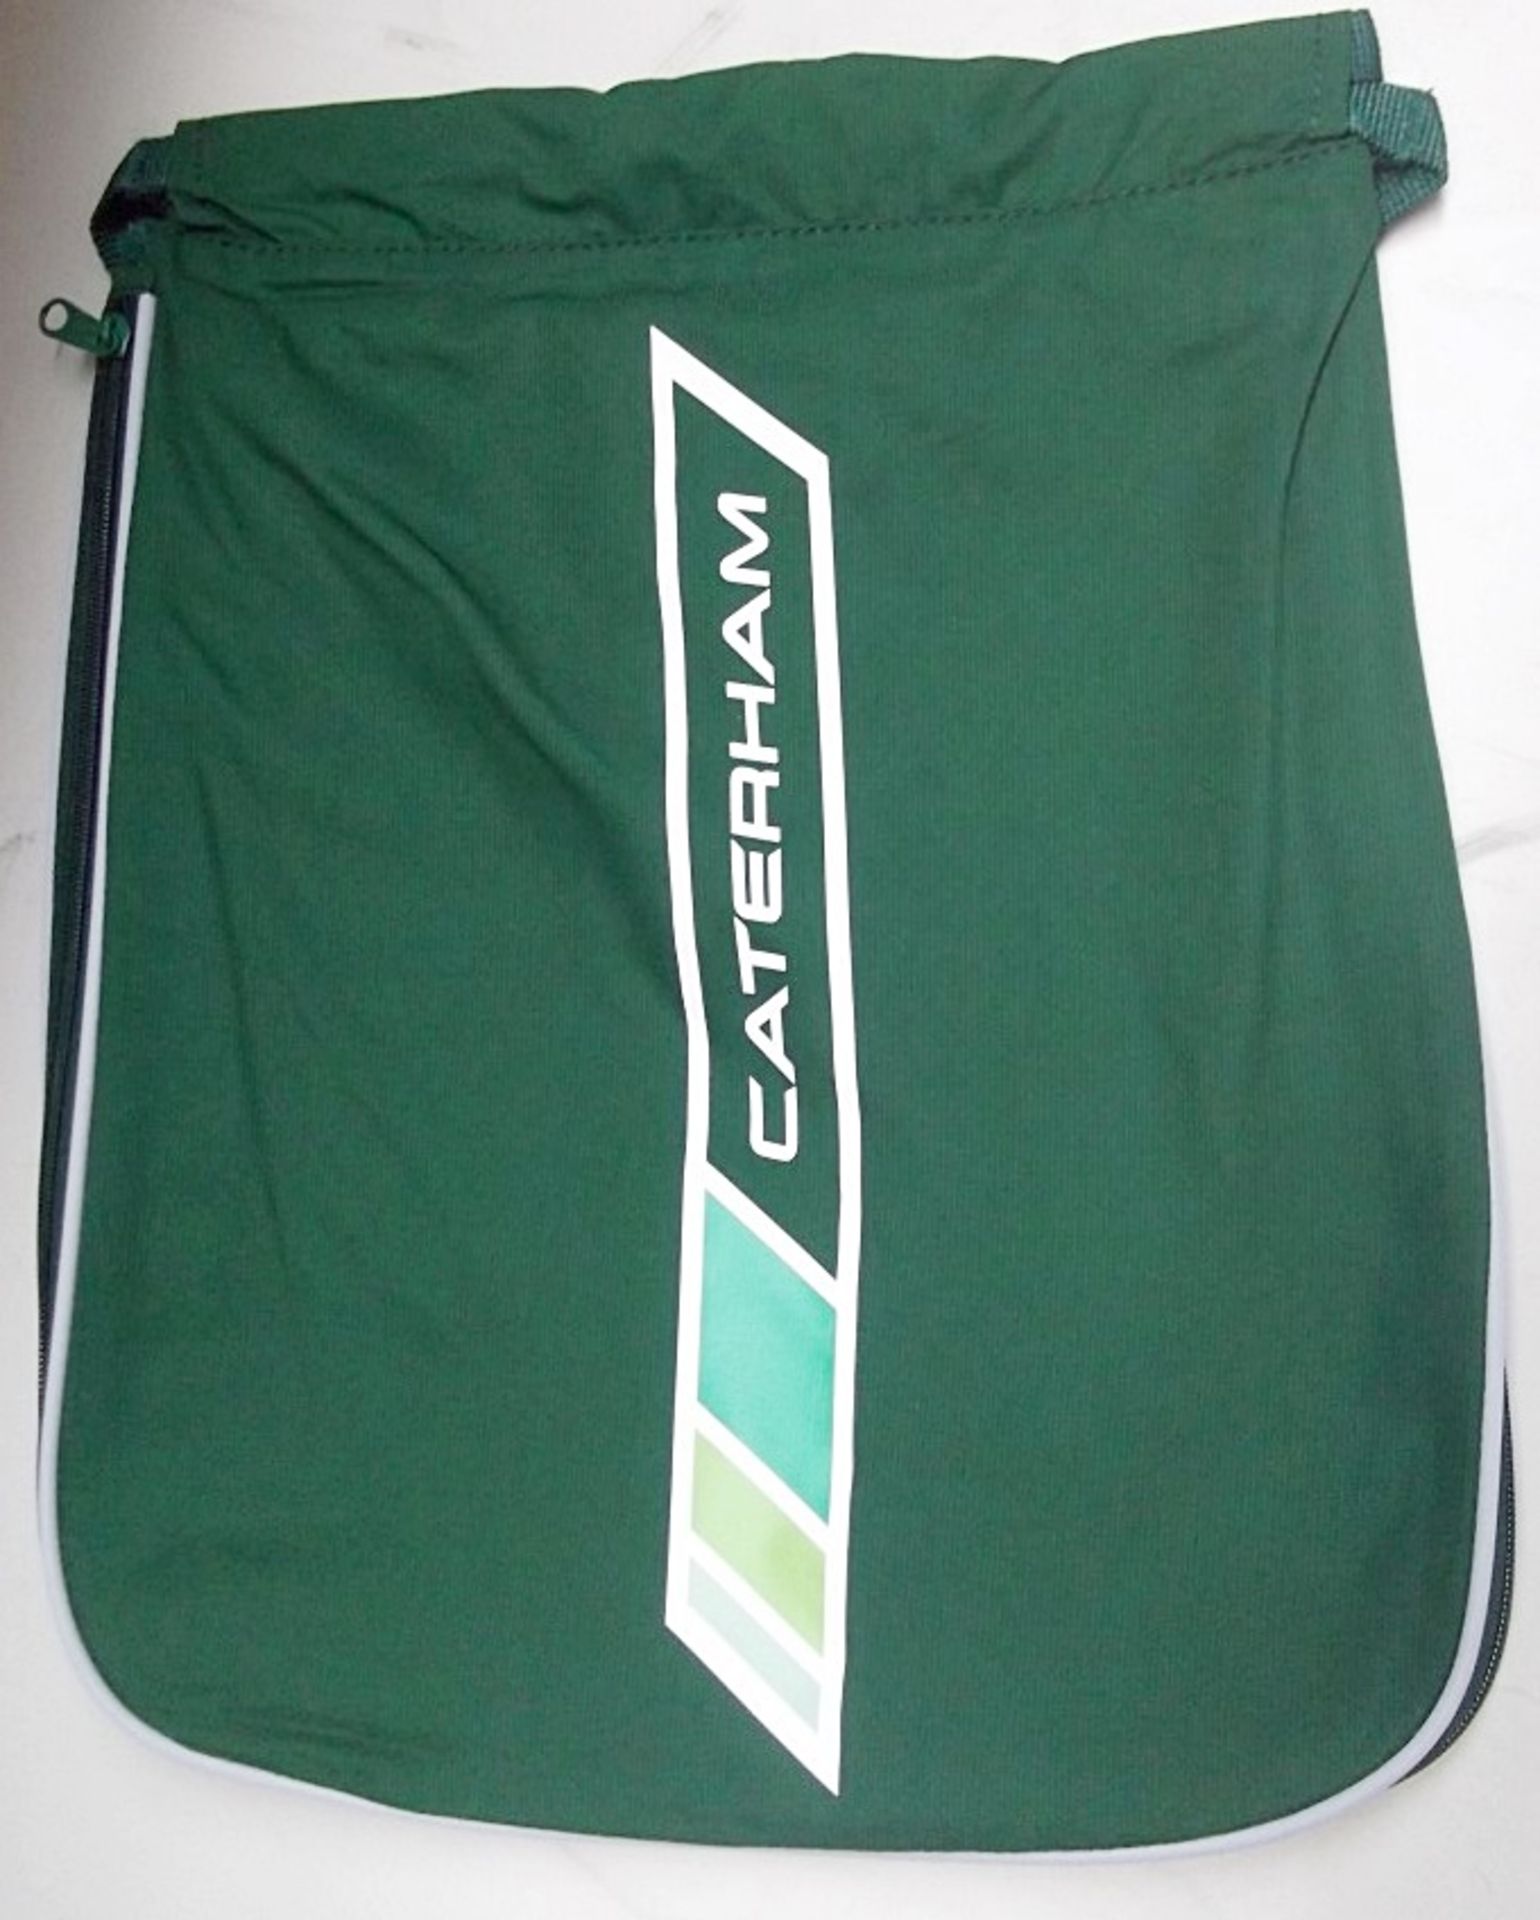 5 x CATERHAM F1 Nylon Backpacks - NEW & SEALED - Lined, With Dual Sholder Straps - CL155 - Ref: - Image 3 of 4